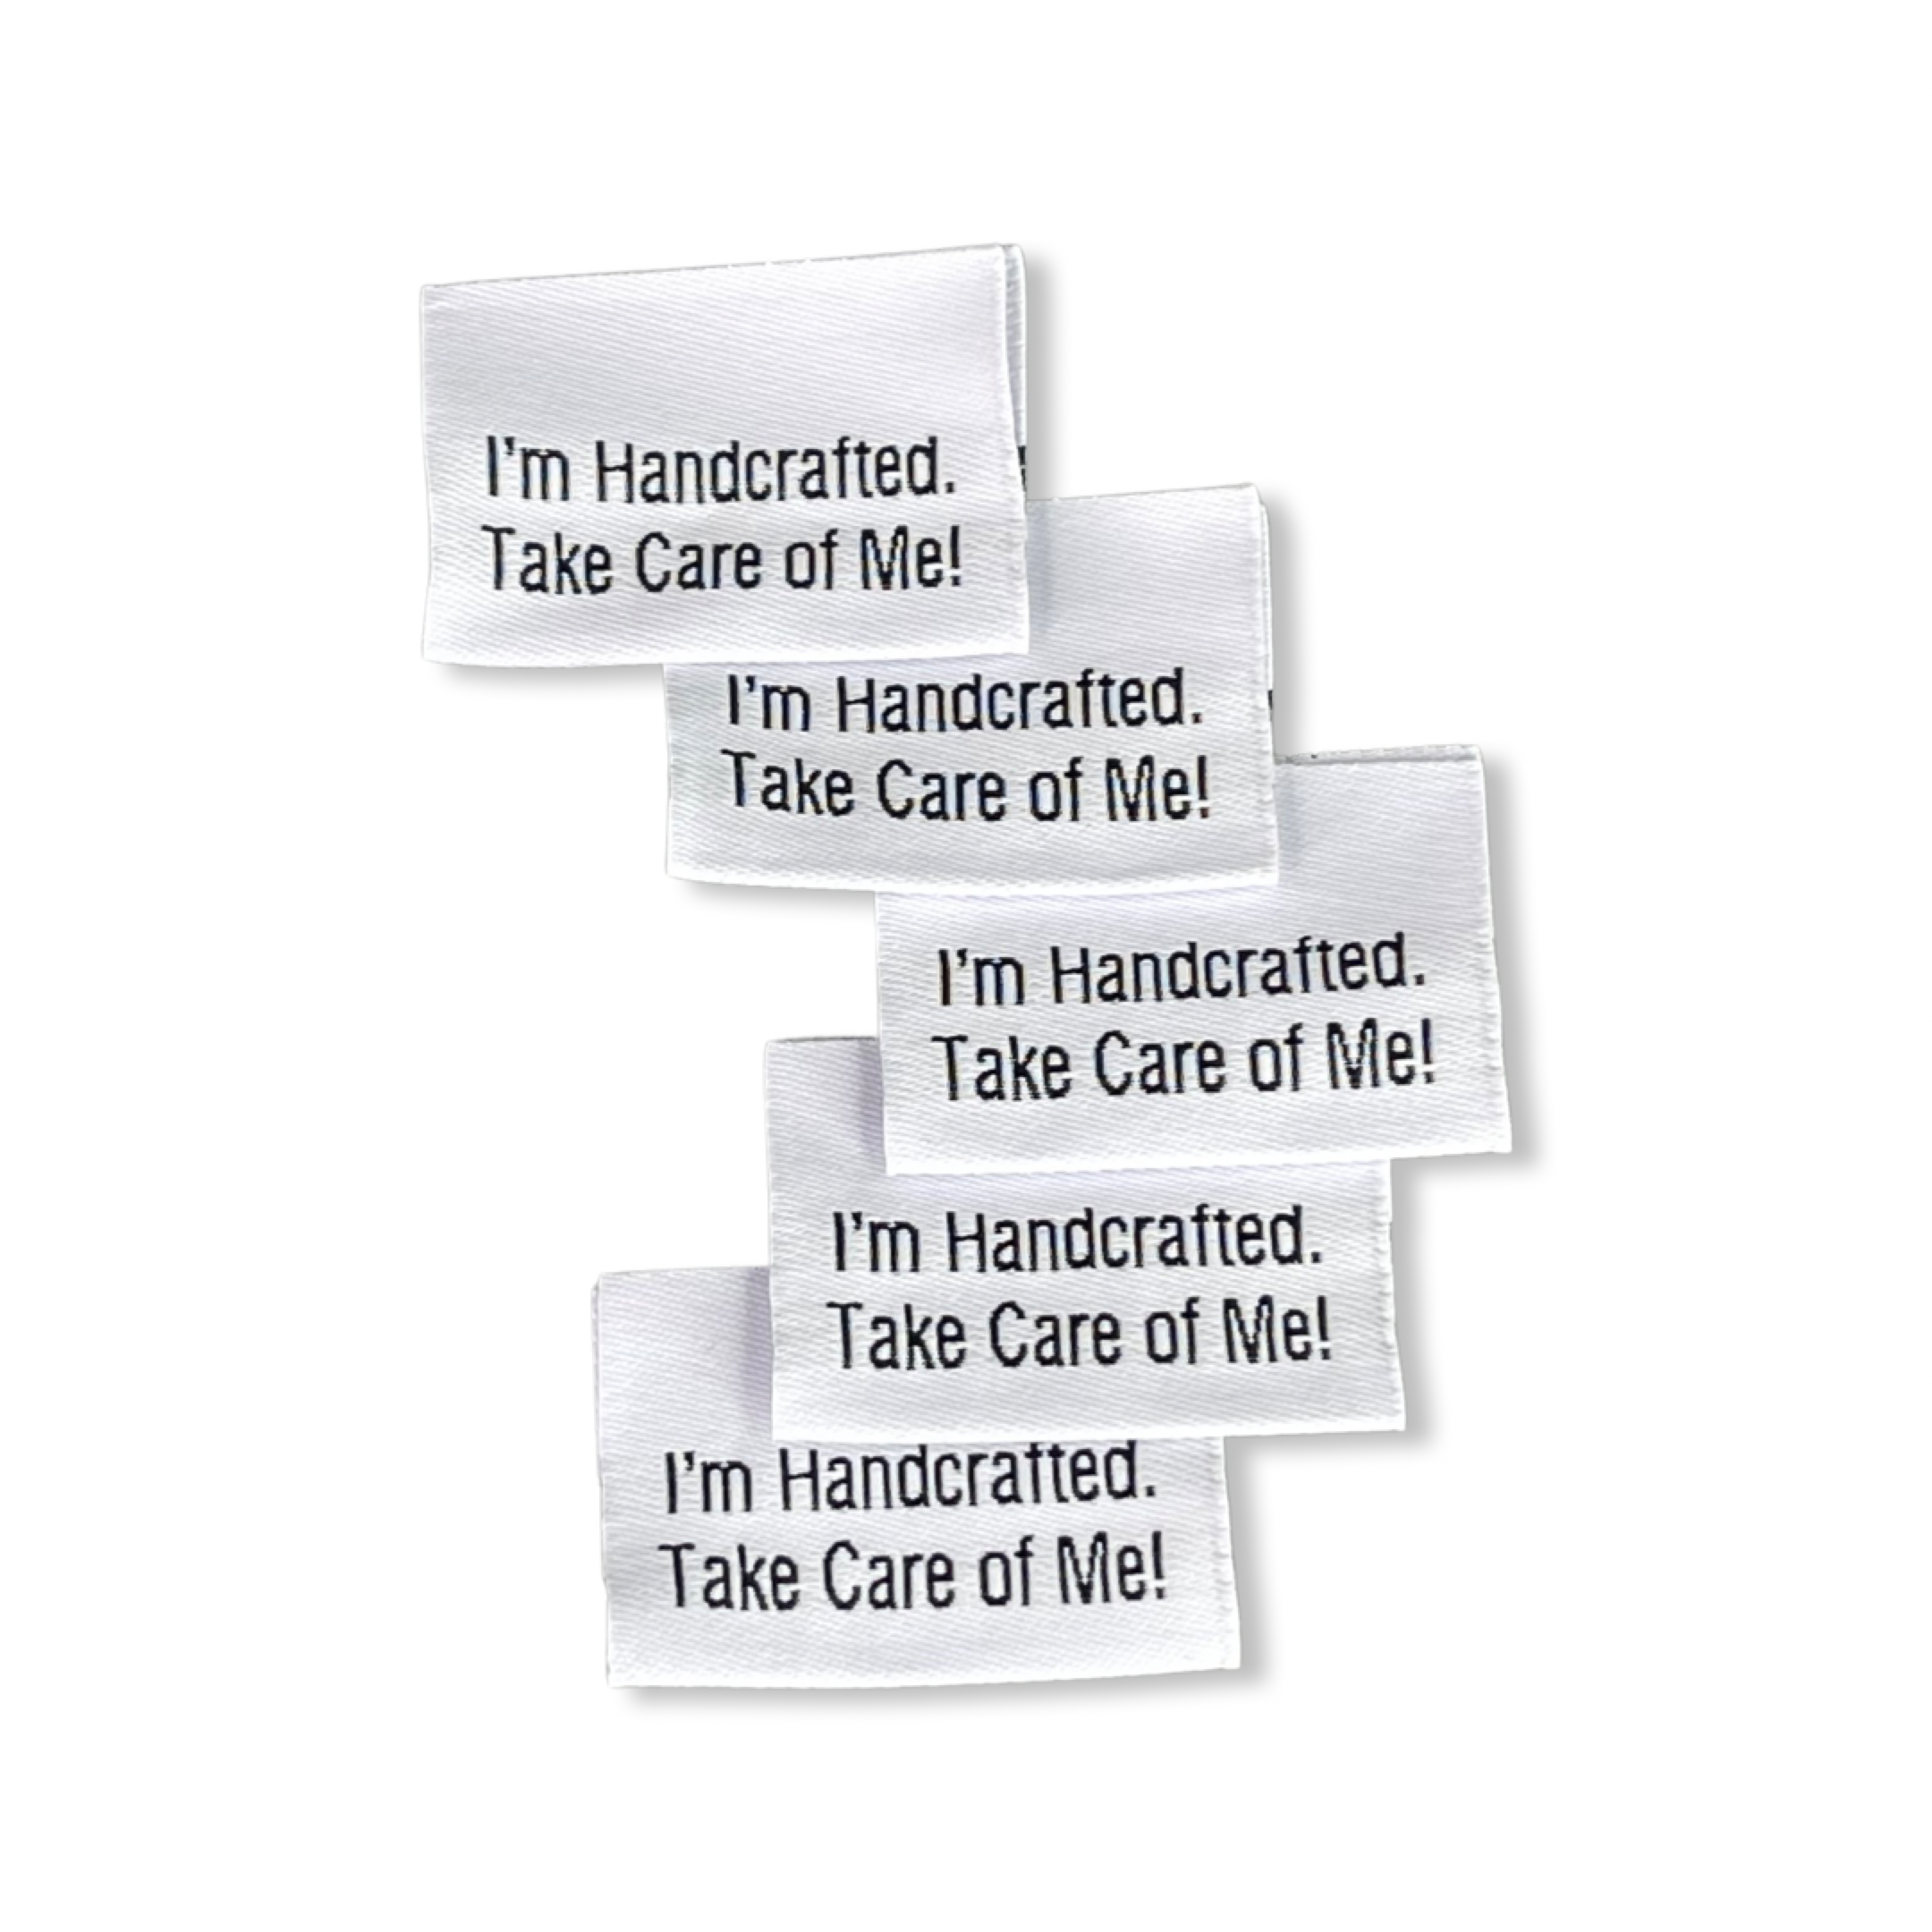 Tags for Handmade Items Clothing Size Labels Please Review Tags Care Tags 